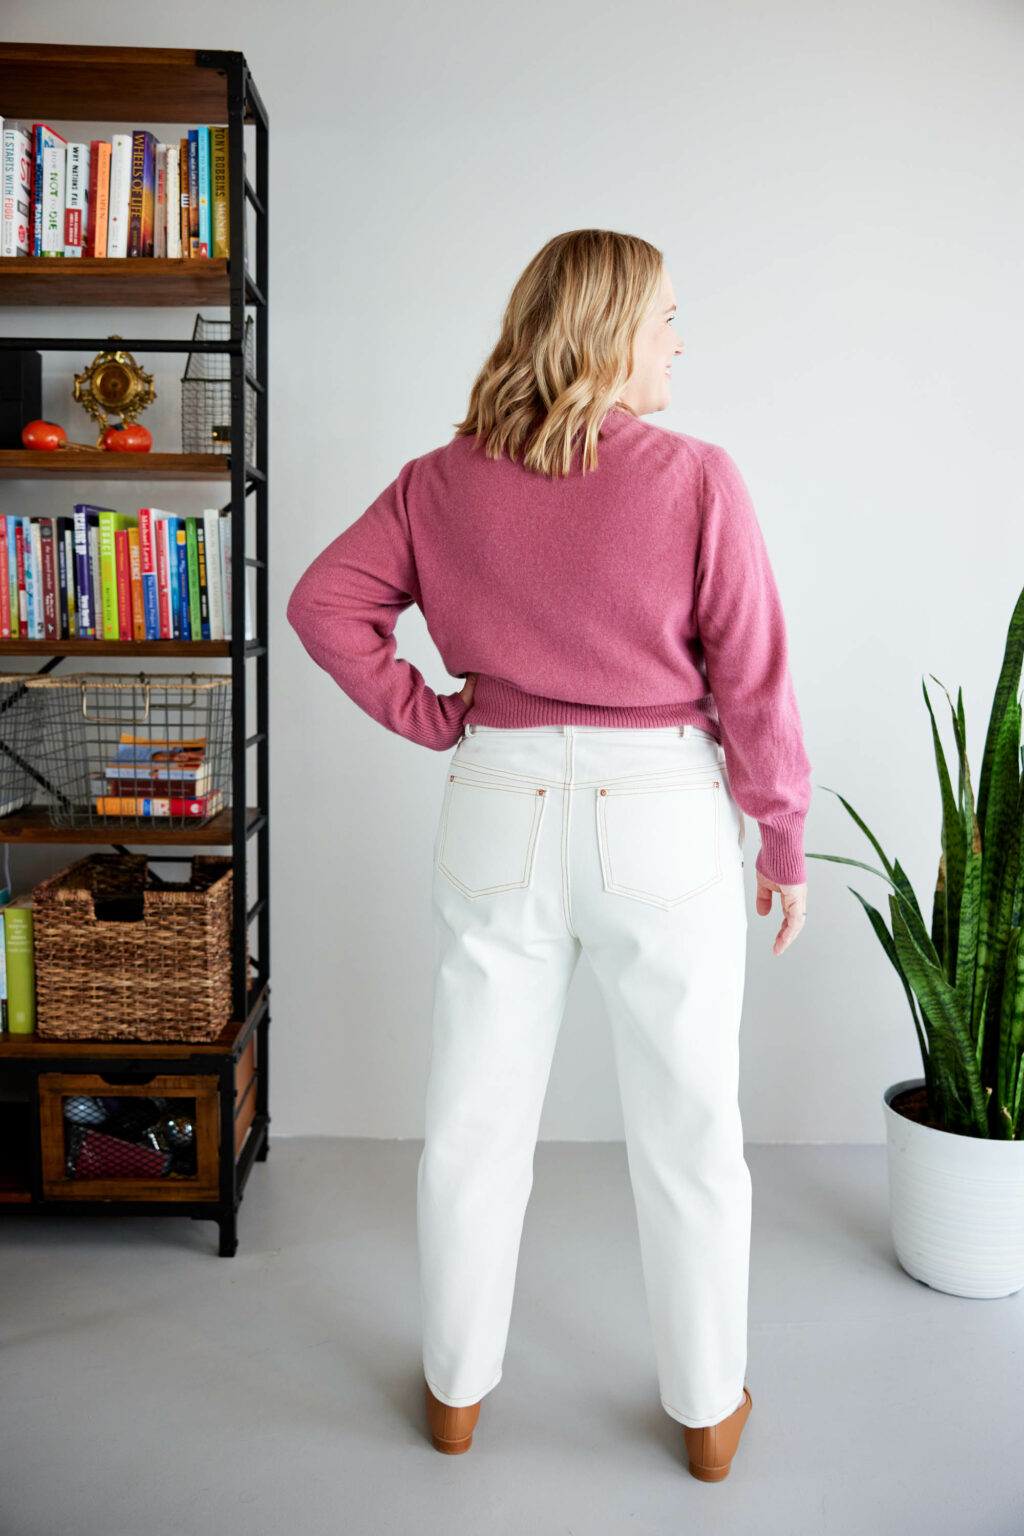 Cashmerette Club: Meet the Creston Jeans, the Club pattern for August ...